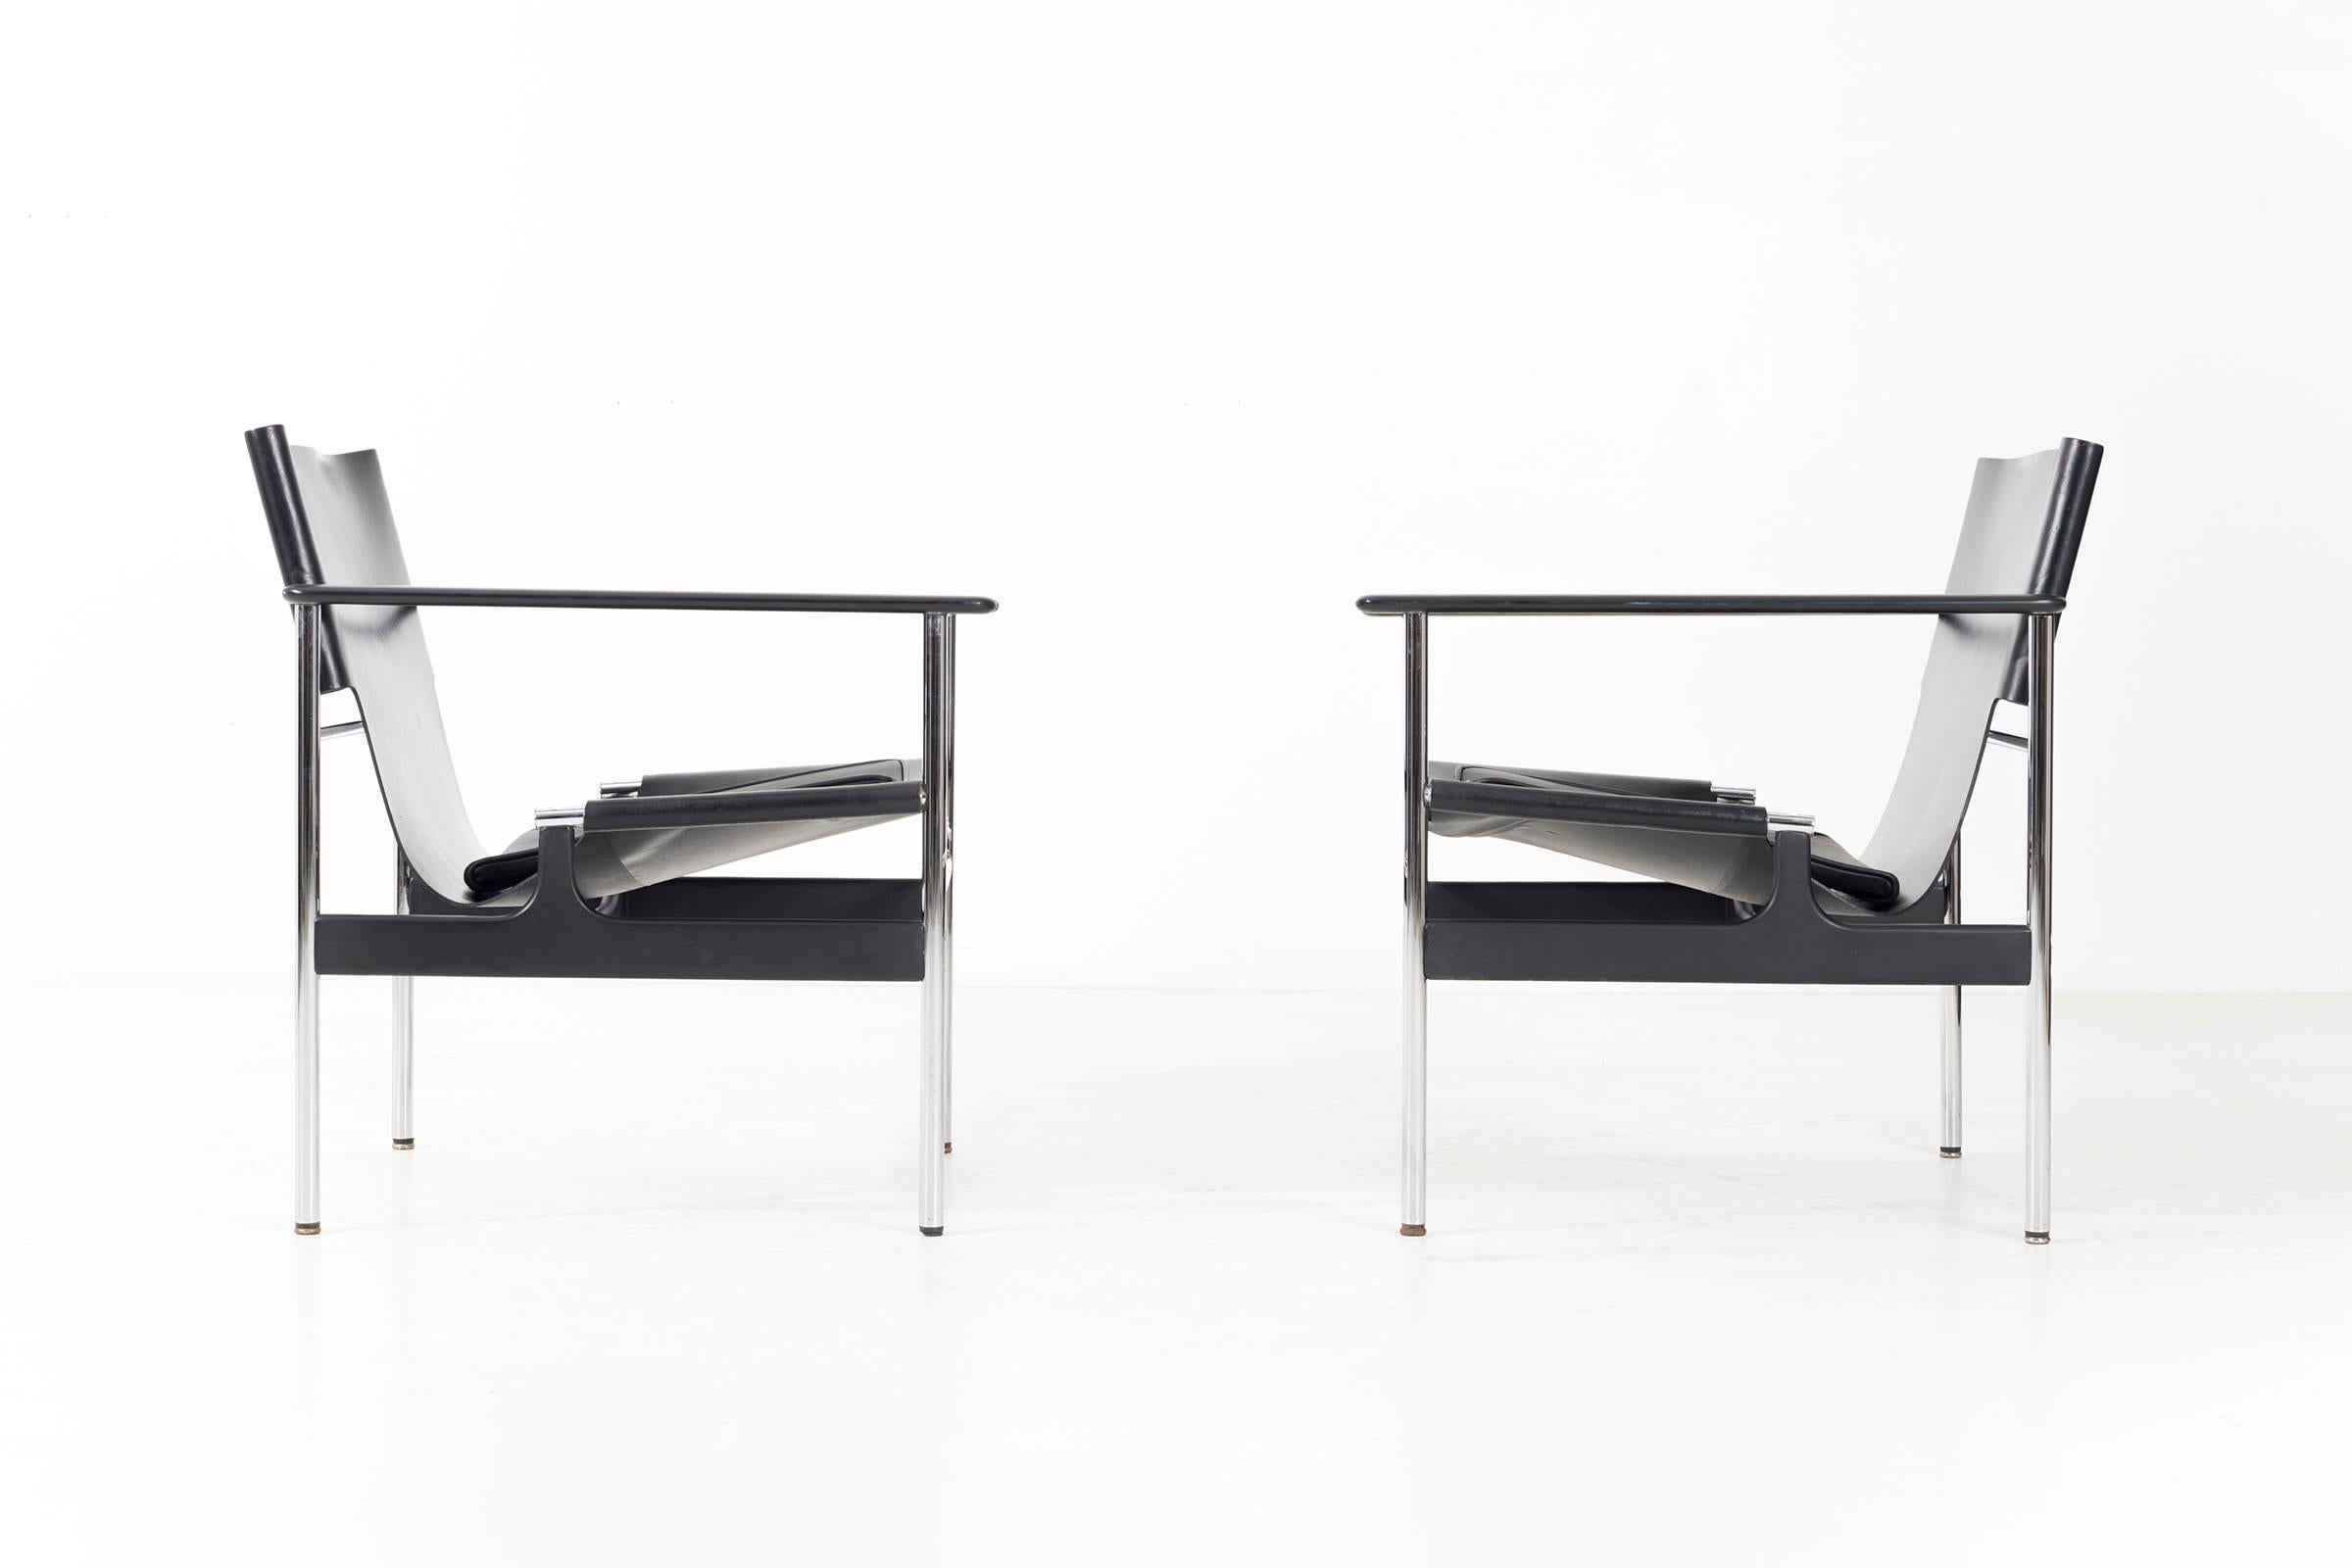 Pair of Pollock Sling chairs for Knoll. Model 657
Charles Randolph Pollock was an American modernist designer who was hired by the legendary George Nelson after graduating in Industrial Design from Pratt Institute in Brooklyn, New York. Pollock